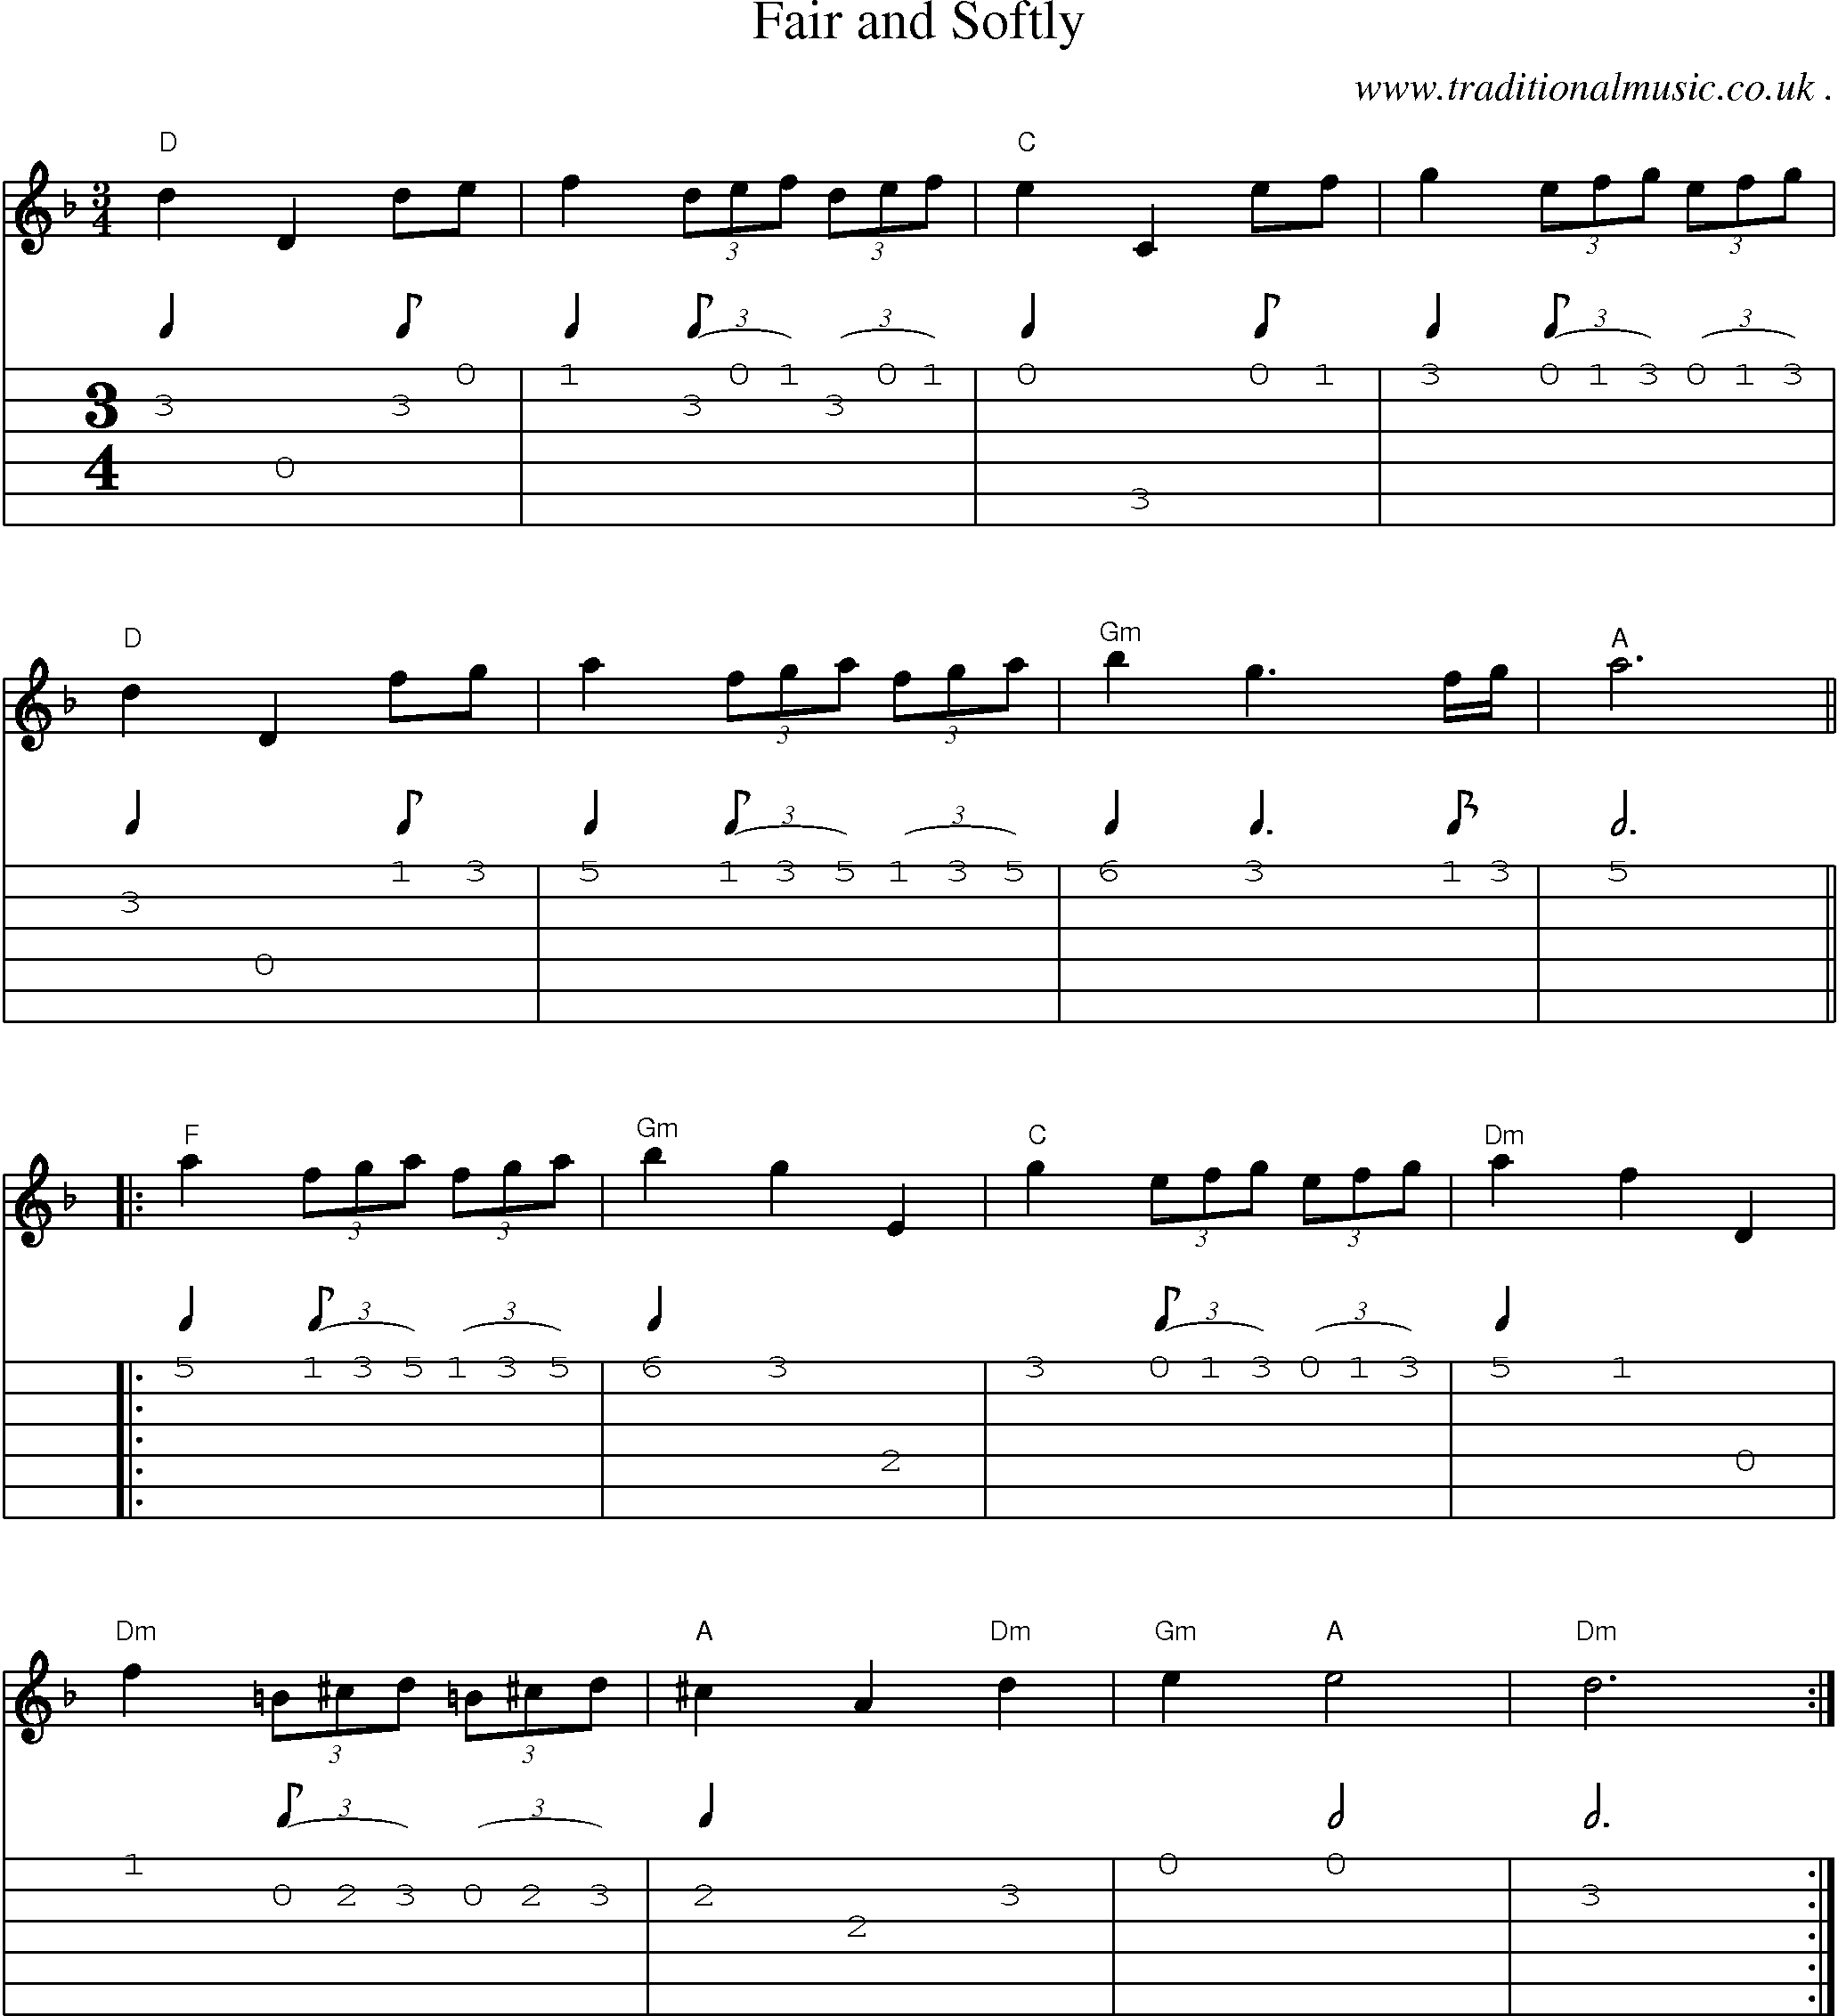 Sheet-Music and Guitar Tabs for Fair And Softly